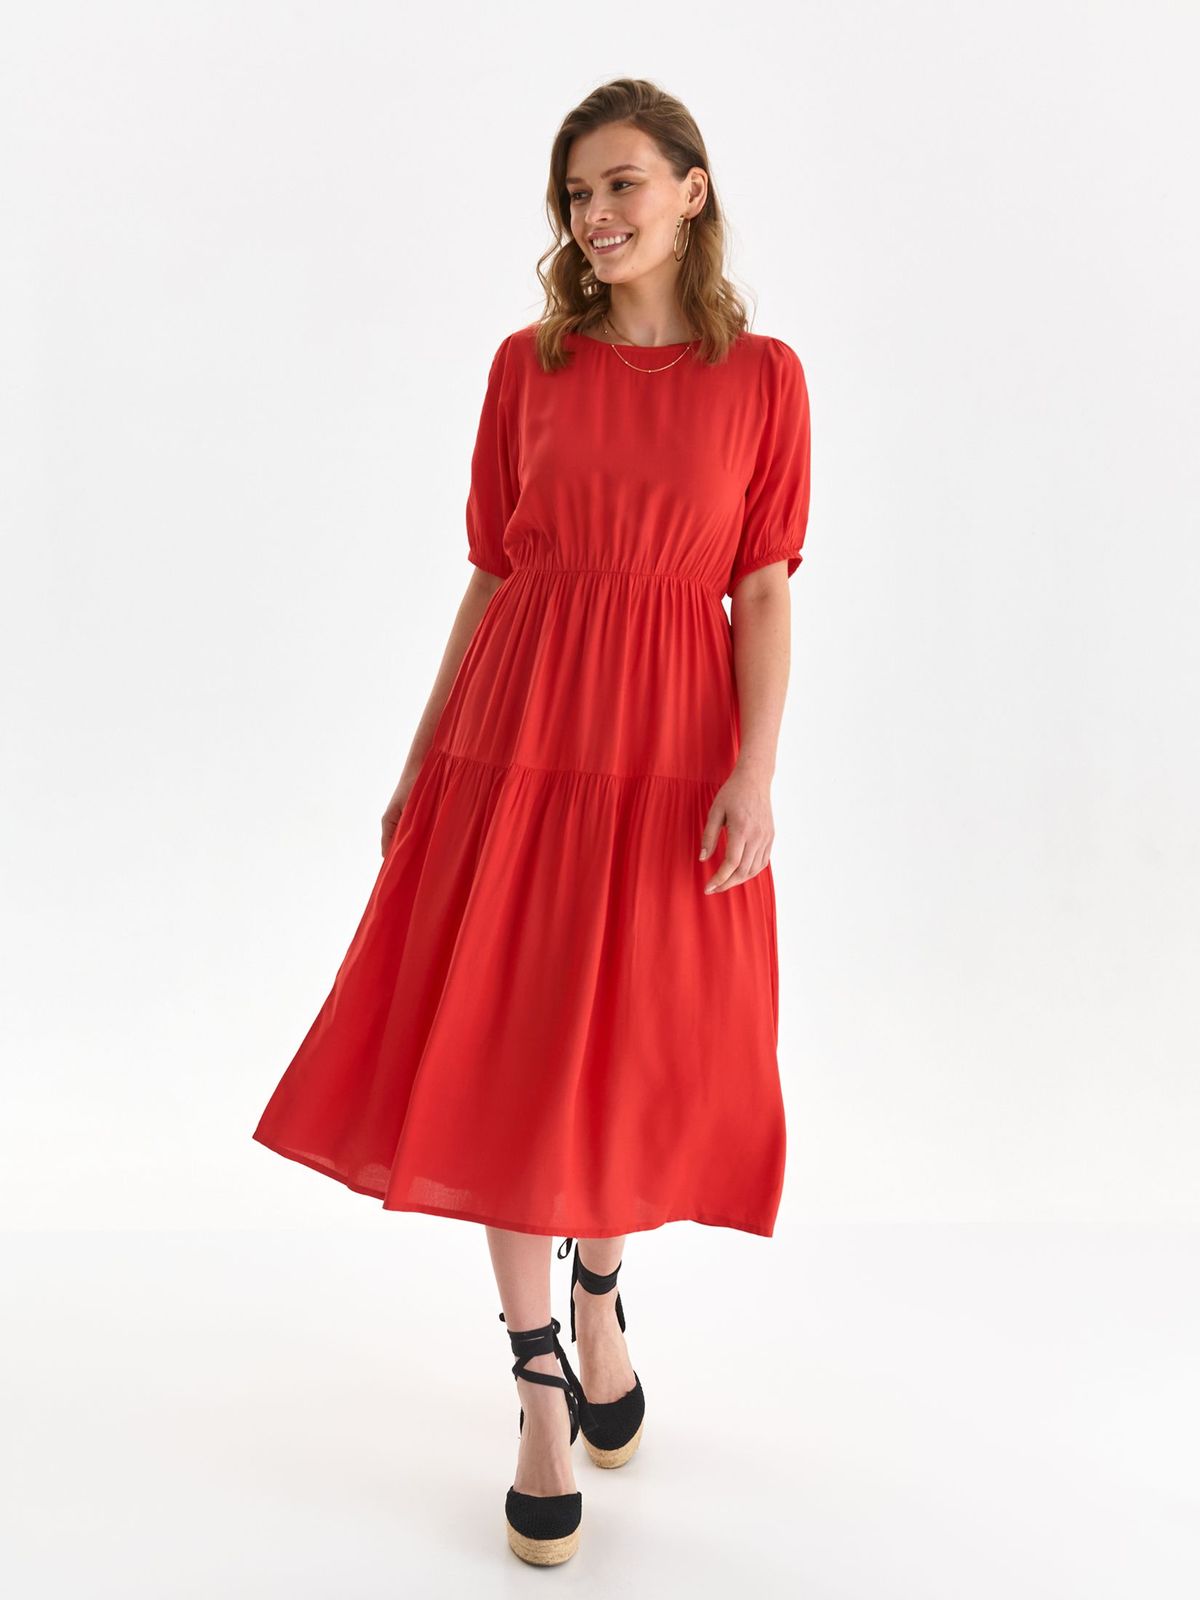 Red dress midi cloche with elastic waist thin fabric with puffed sleeves